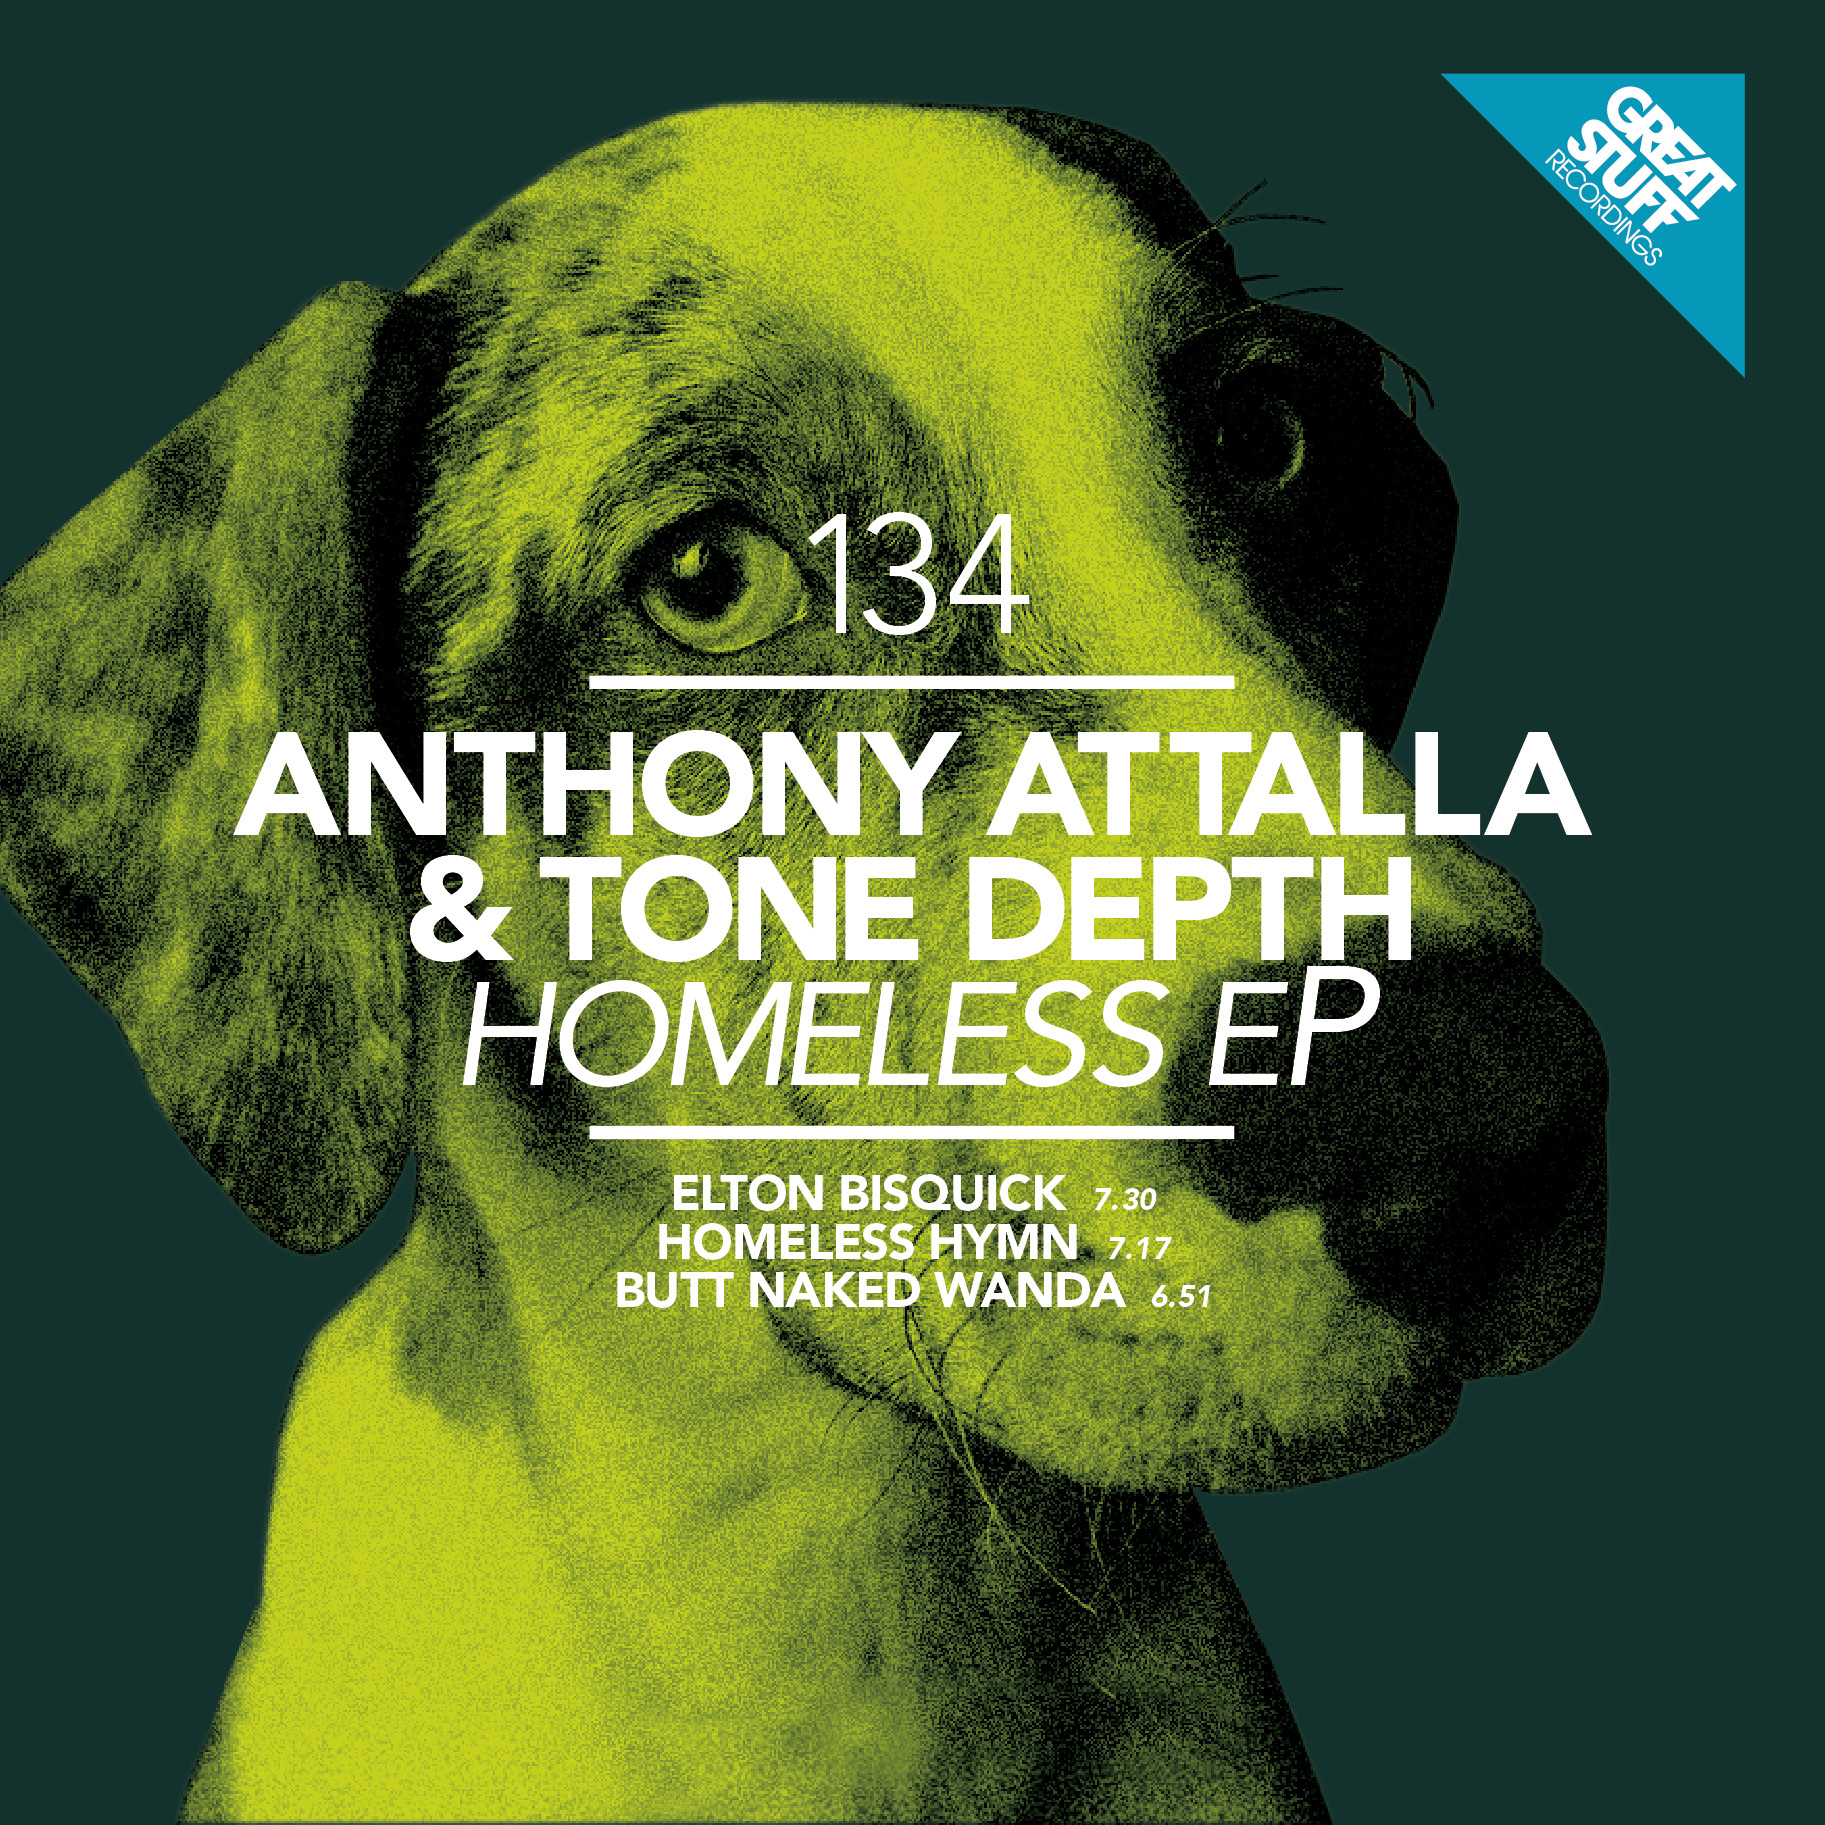 Anthony Attalla and Tone Depth - Homeless EP